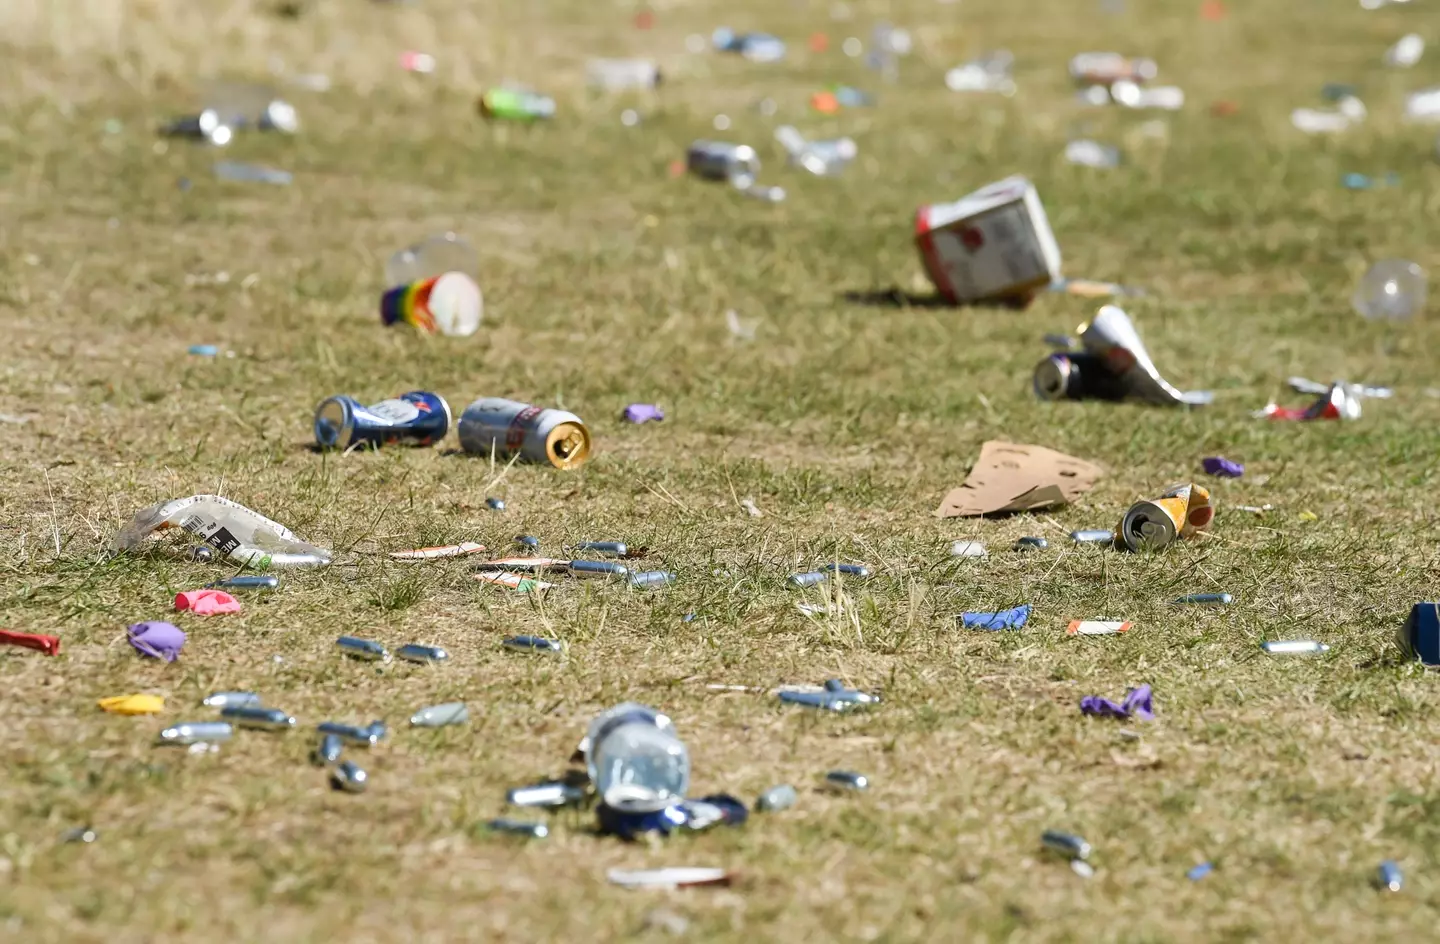 Festivals across the UK will be littered with the leftover laughing gas cannisters.